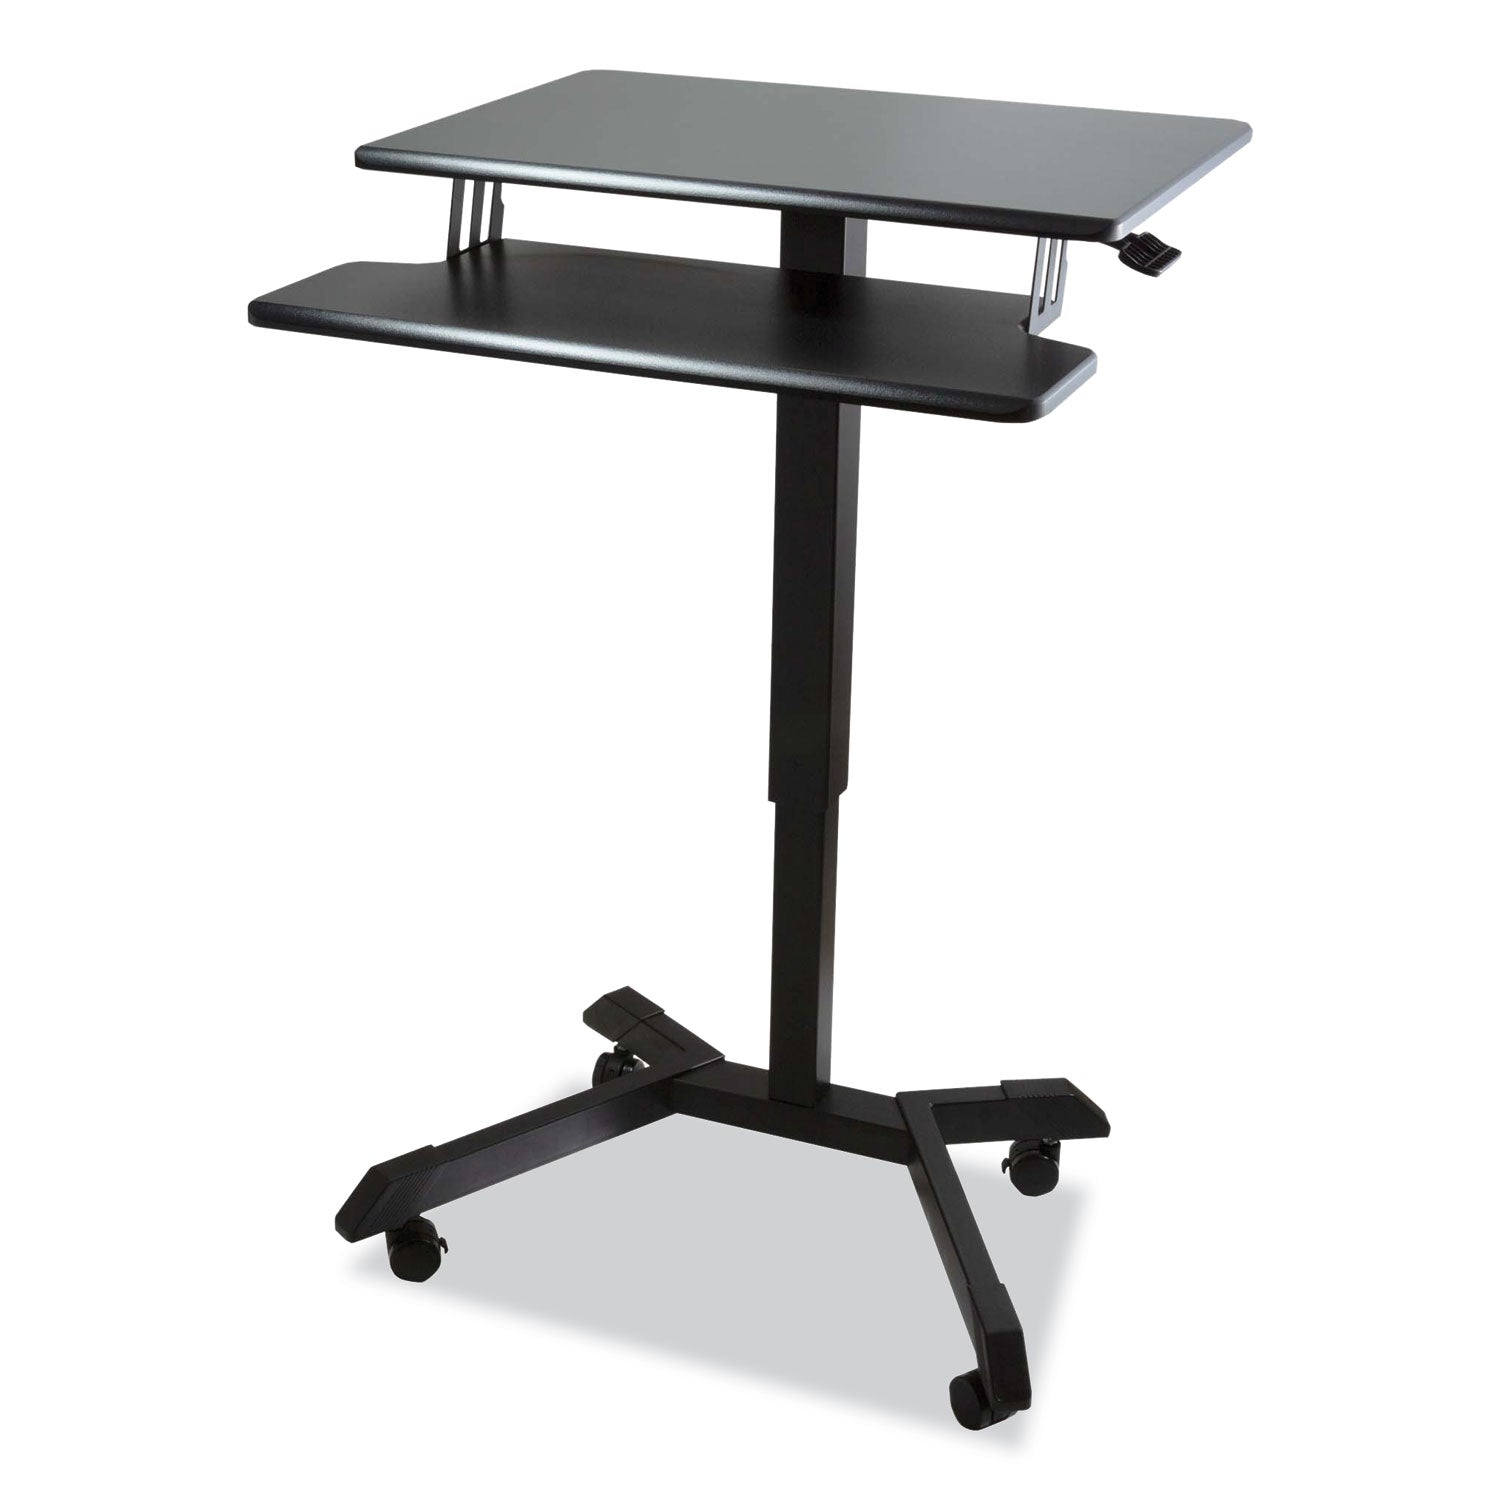 mobile-height-adjustable-standing-desk-with-keyboard-tray-256-x-177-x-29-to-44-black-ships-in-1-3-business-days_vctdc550 - 4